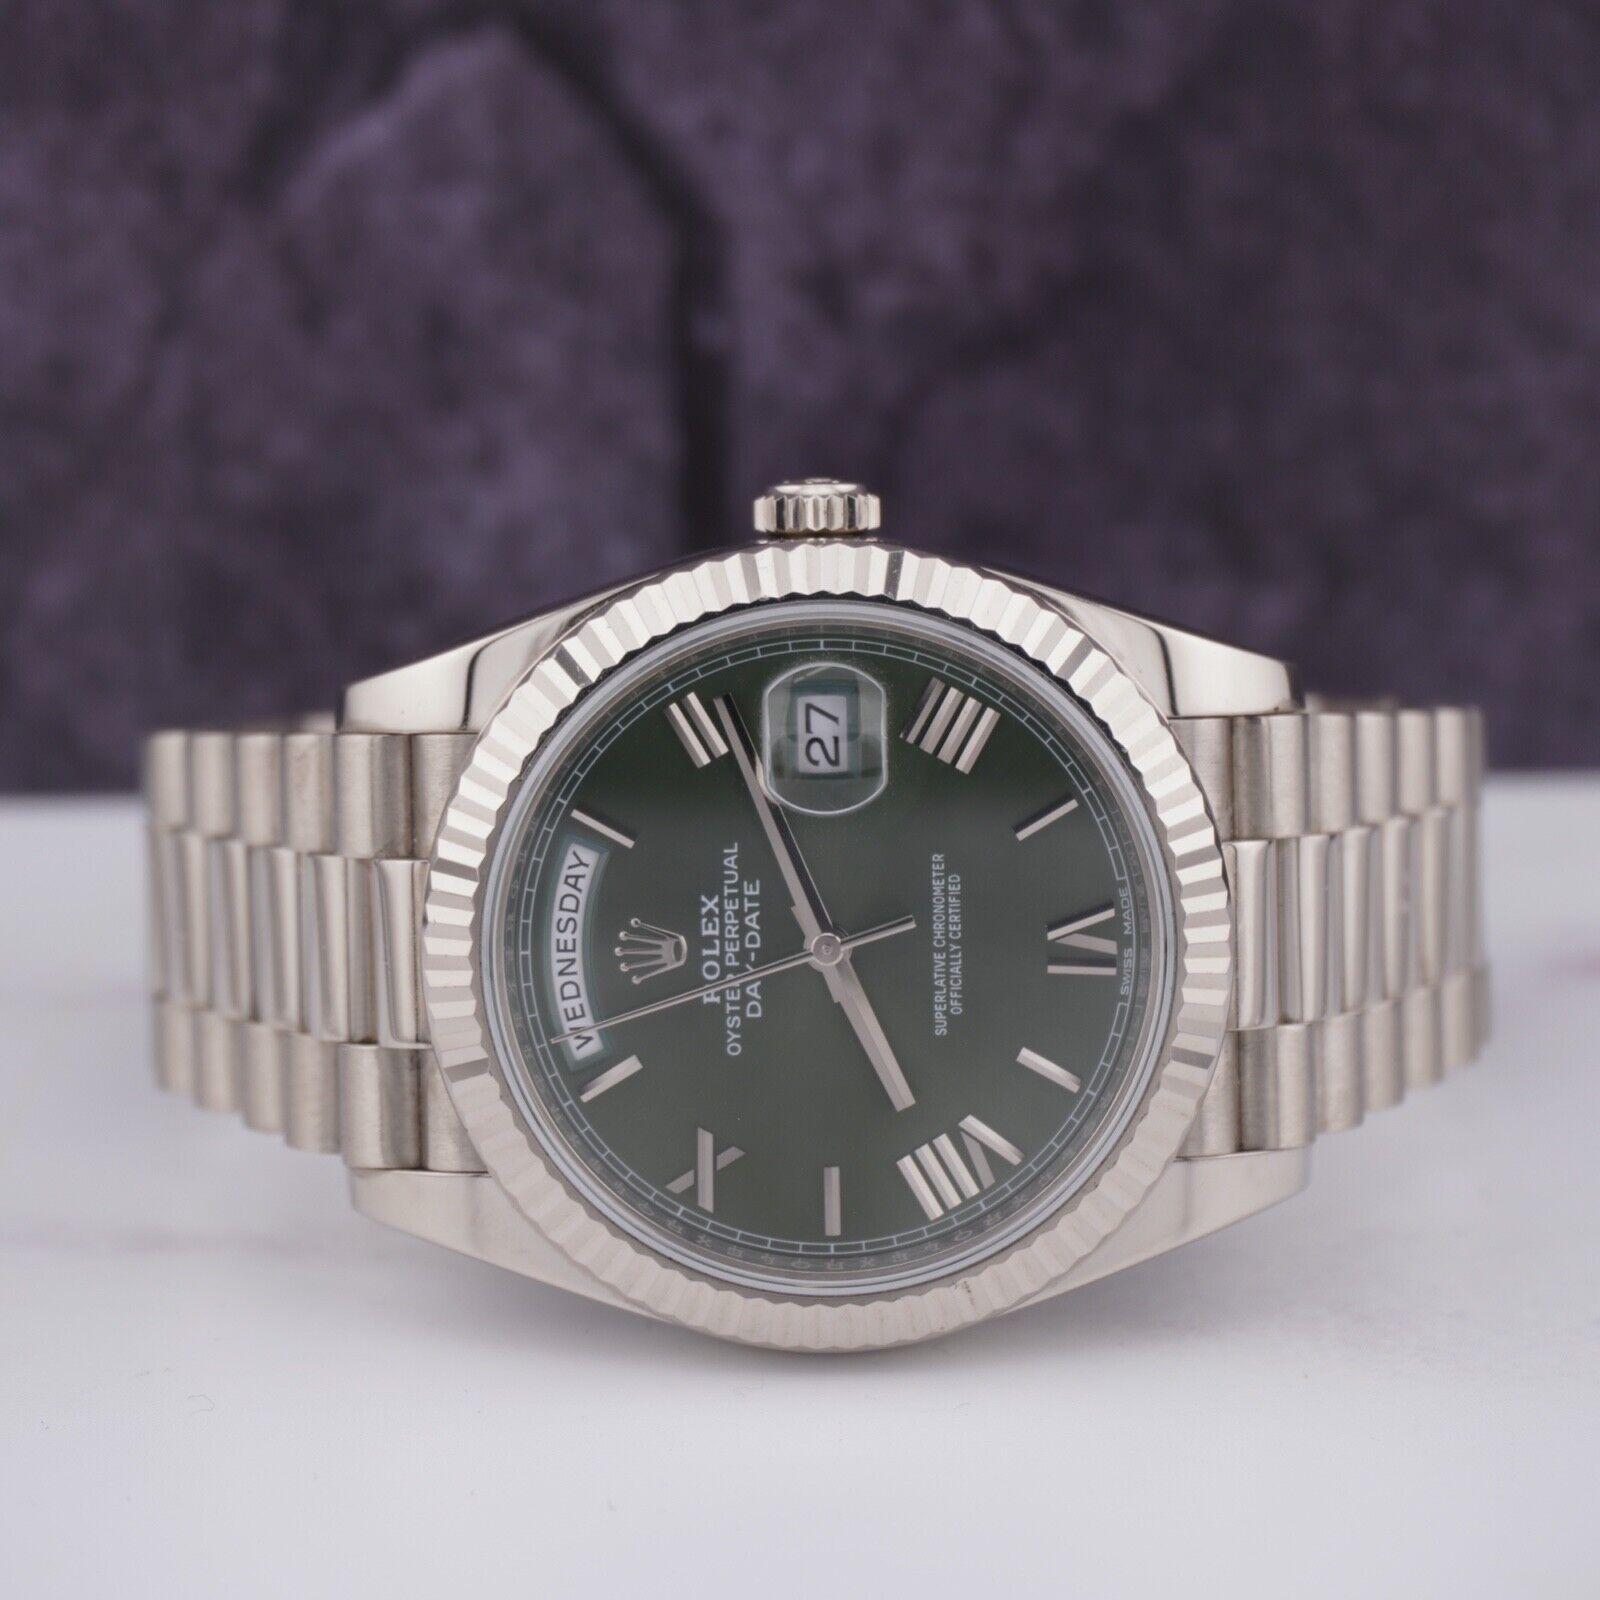 Rolex Day-Date President 40mm Watch. A Pre-owned watch w/ Original Box and 2017 Card. Watch is 100% Authentic and Comes with Authenticity Card. Watch Reference is 228239 and is in Excellent Condition (See Pictures). The dial color is Olive Green and